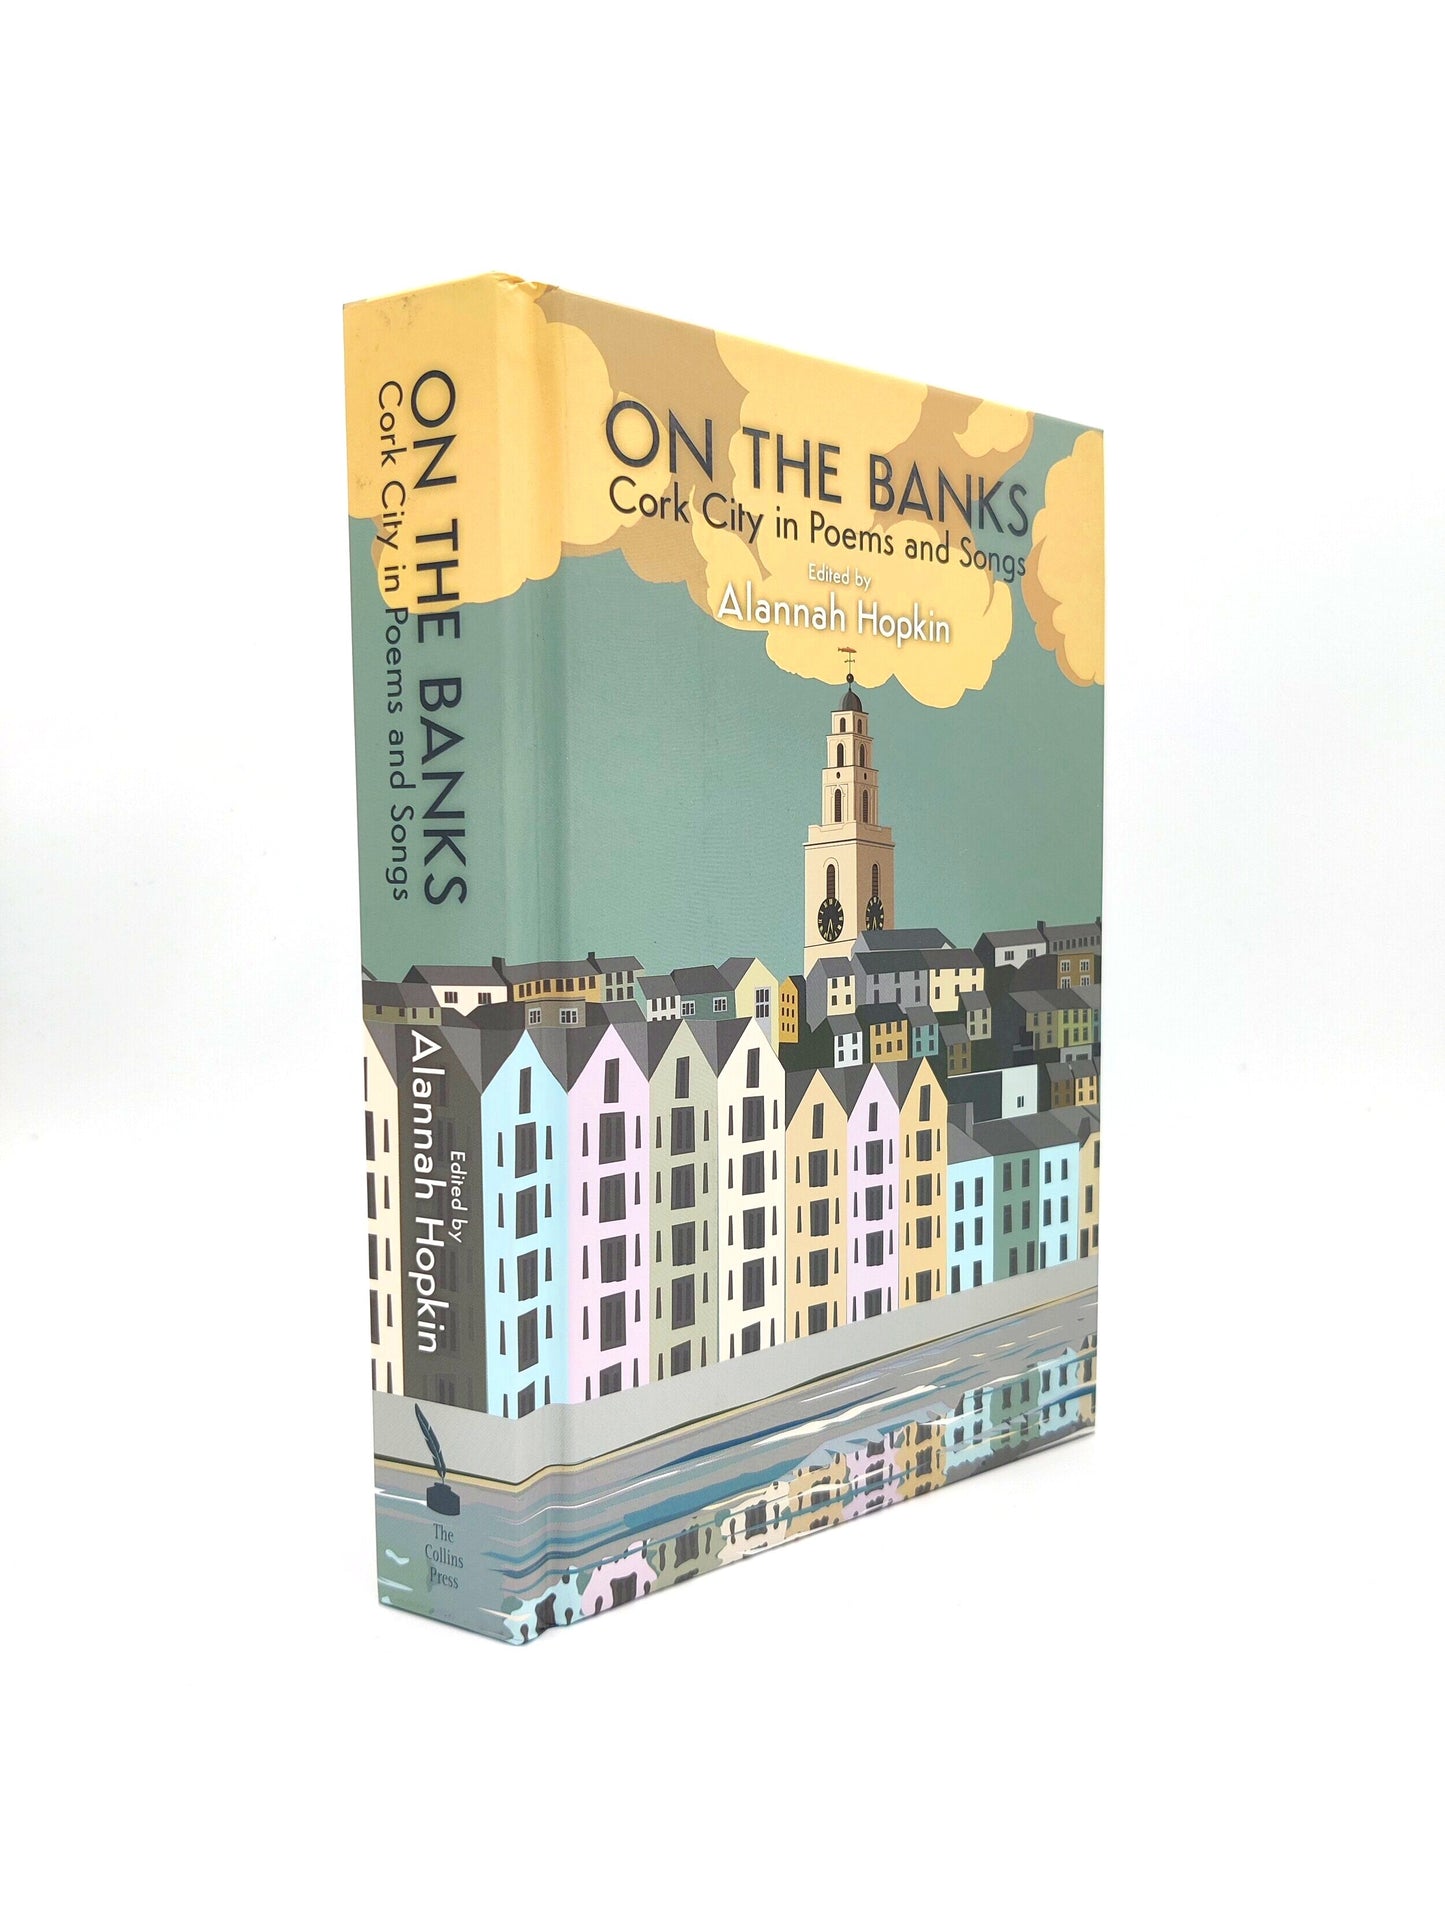 On the Banks: Cork City in Poems and Songs Hardback Book